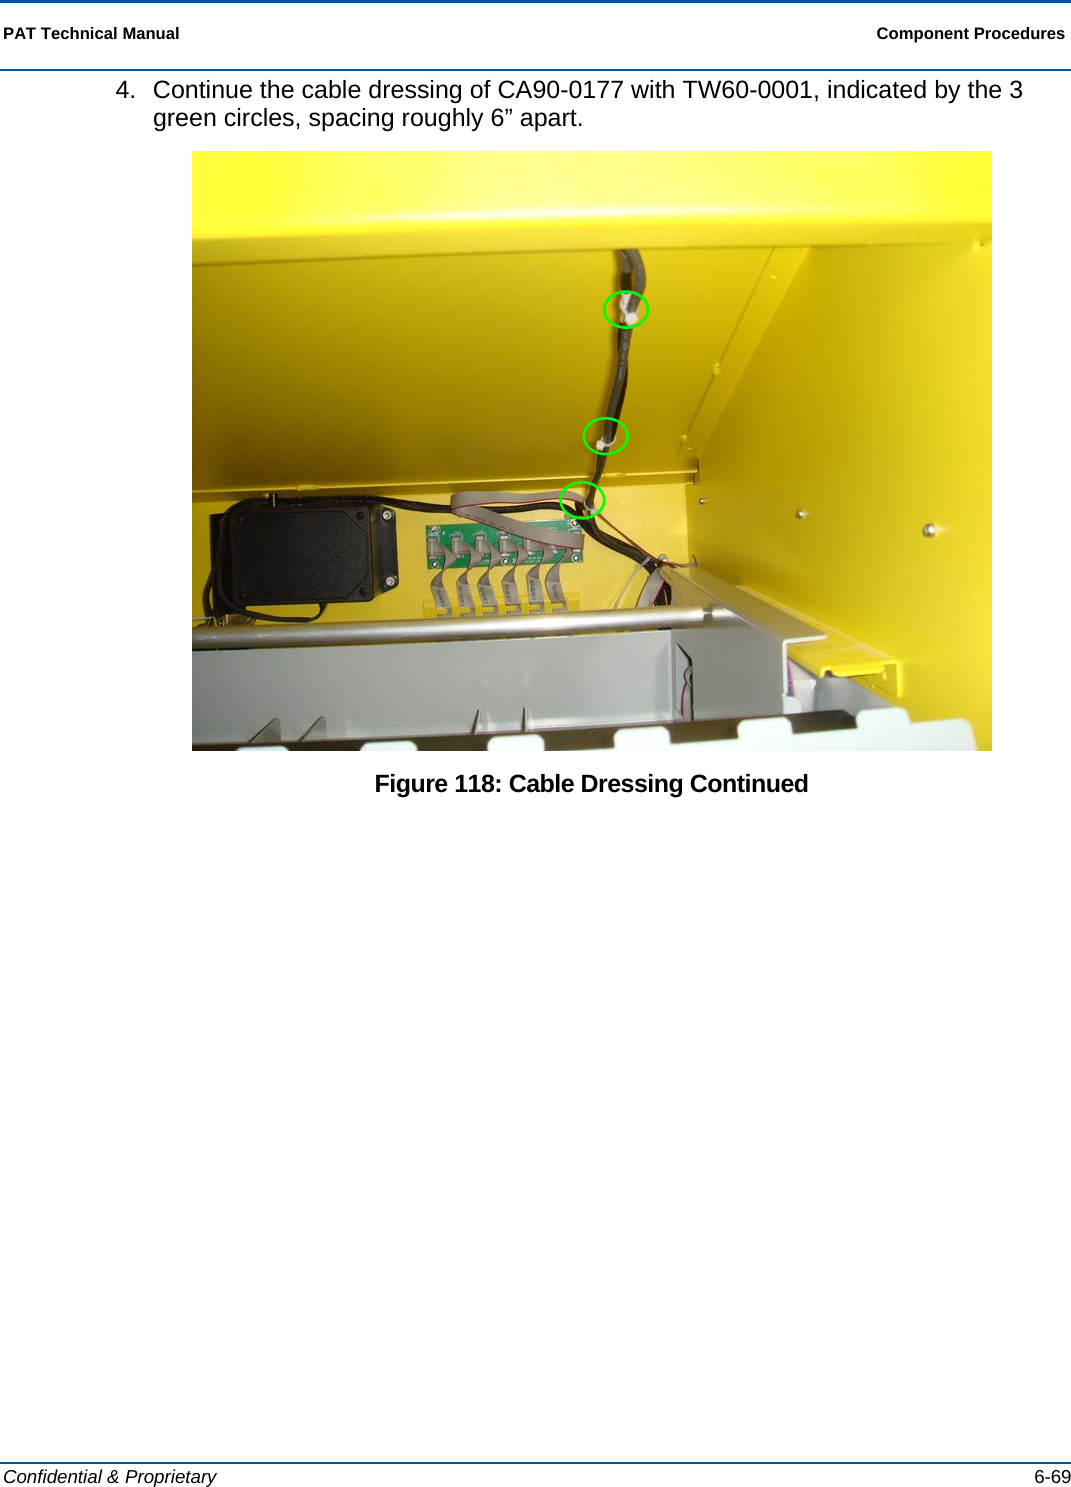  PAT Technical Manual  Component Procedures  Confidential &amp; Proprietary   6-69 4.  Continue the cable dressing of CA90-0177 with TW60-0001, indicated by the 3 green circles, spacing roughly 6” apart.  Figure 118: Cable Dressing Continued 